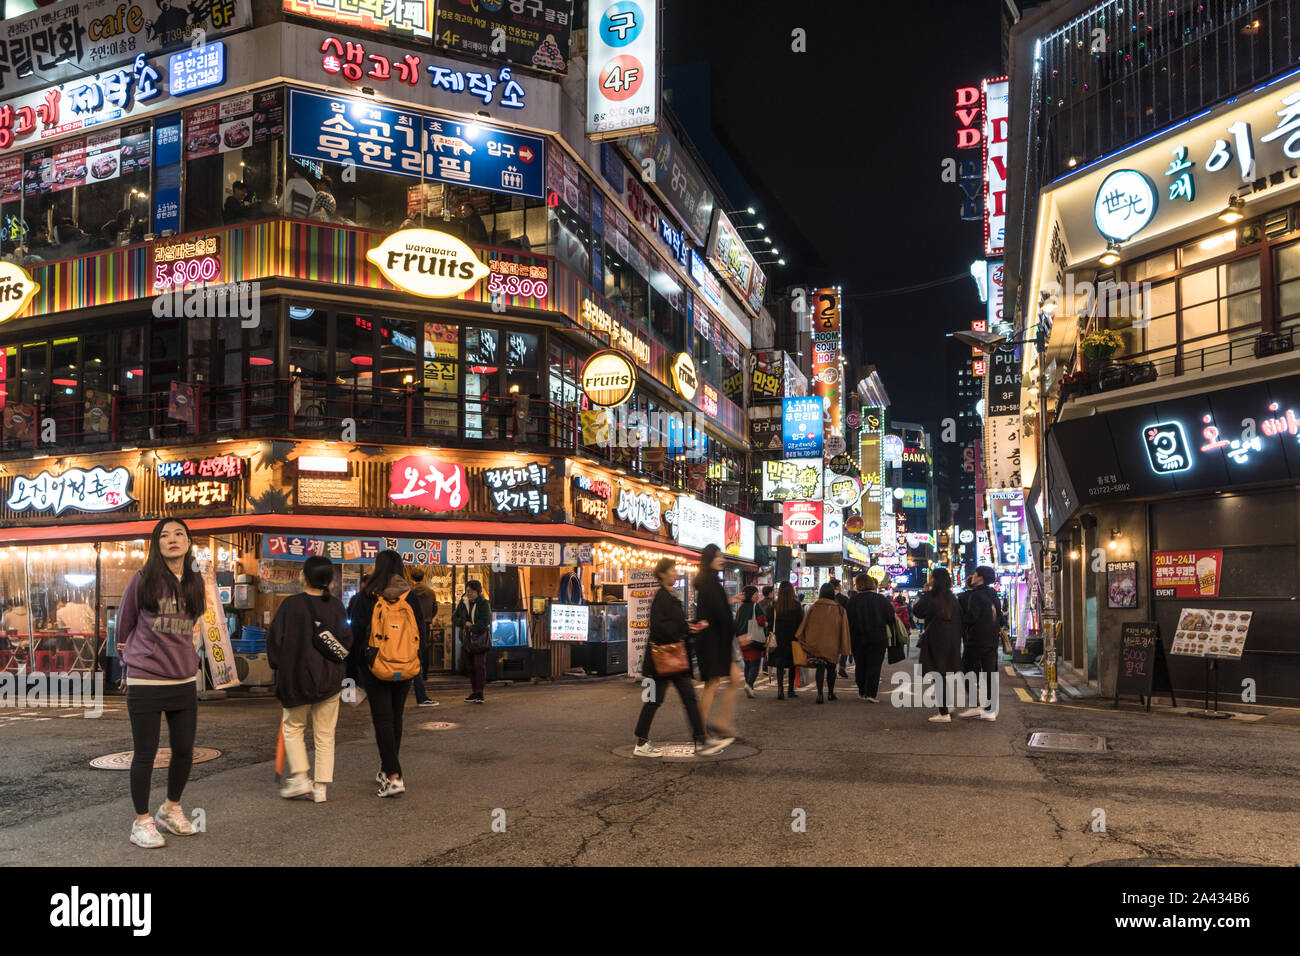 Seoul, South Korea - 3 November 2019: People walk the streets of Insadong nightlife district filled with bar and restaurant. Stock Photo